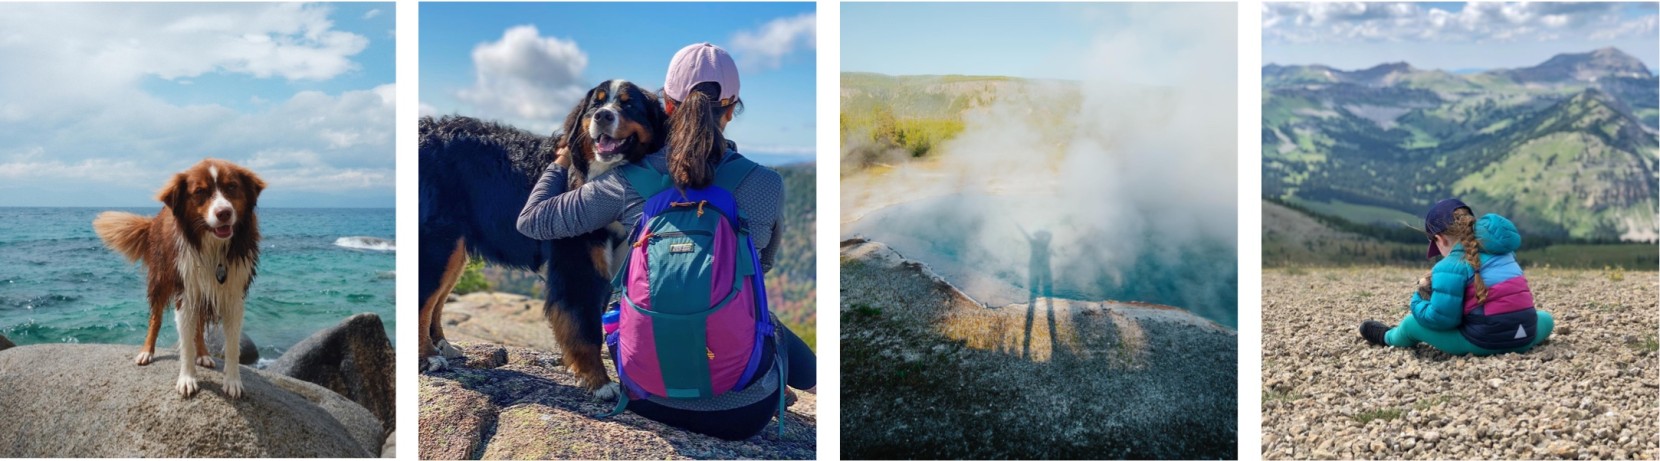 2 images of people and pets and 2 images of people enjoying the outdoors.